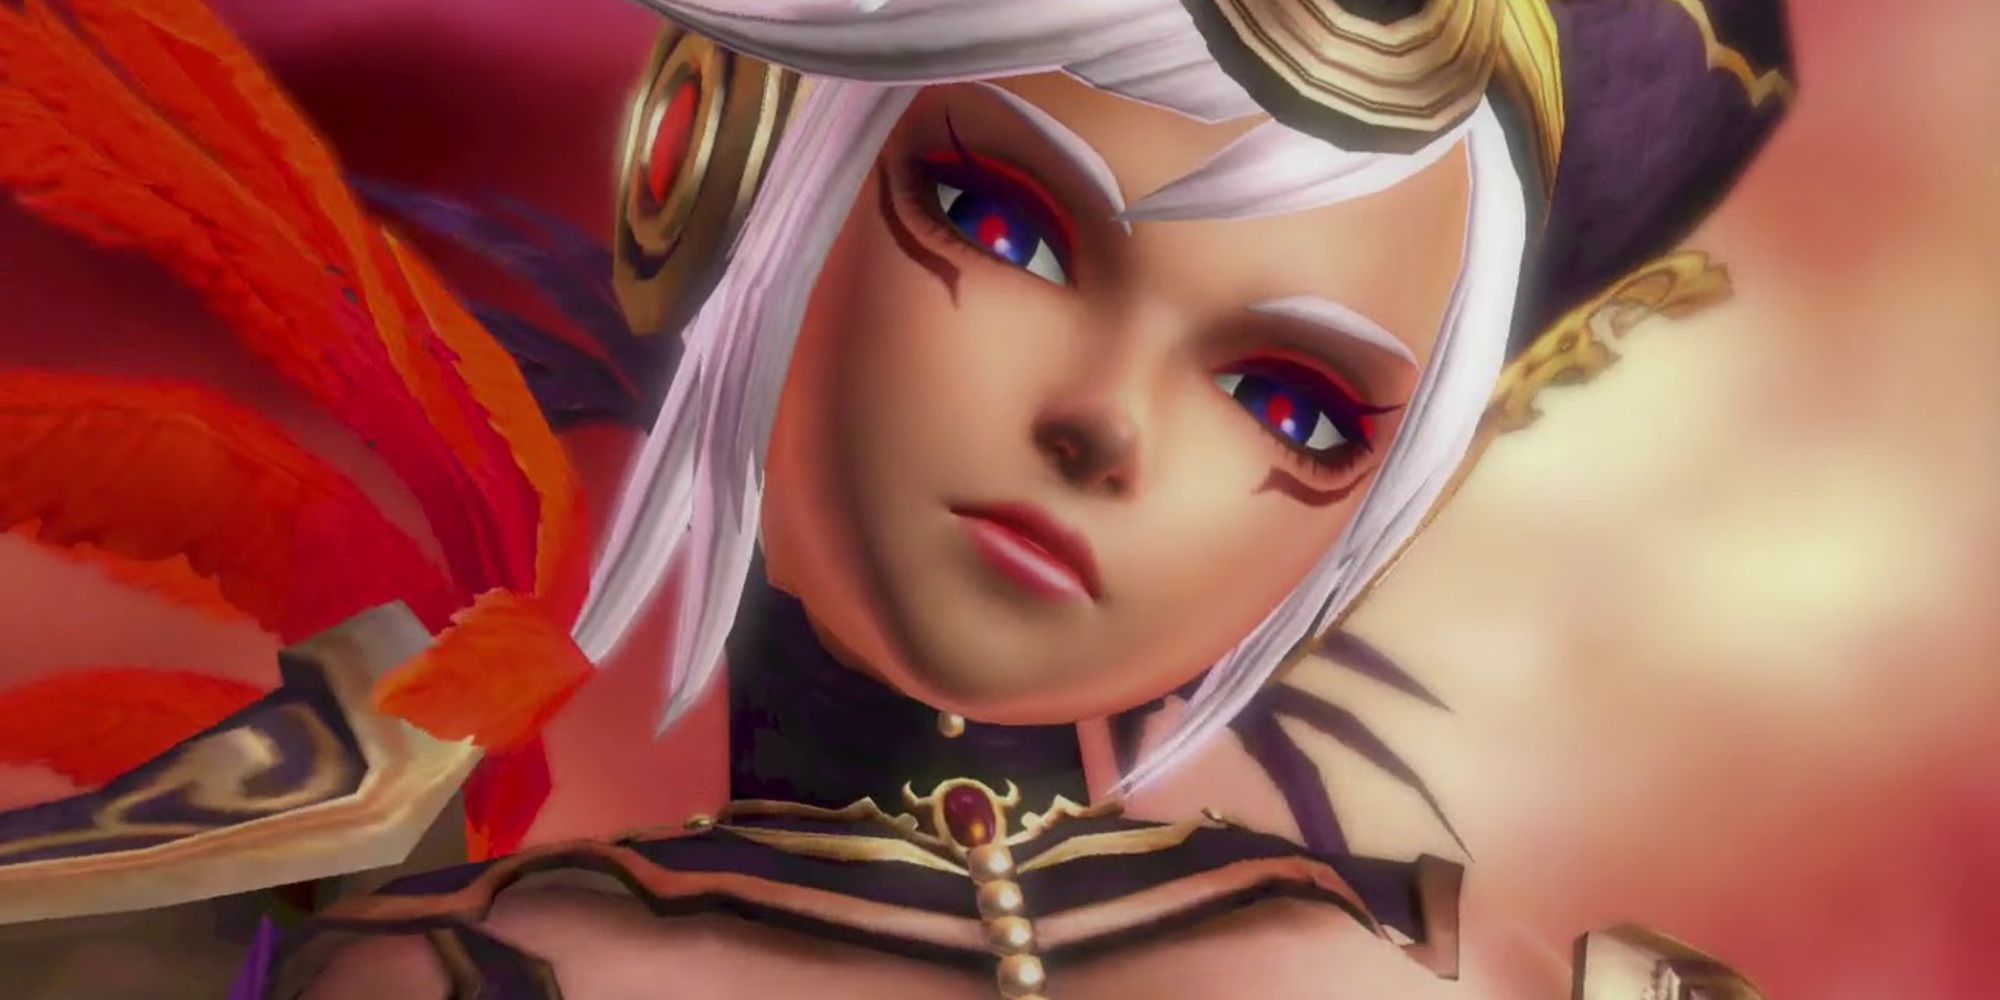 Cia from Hyrule Warriors